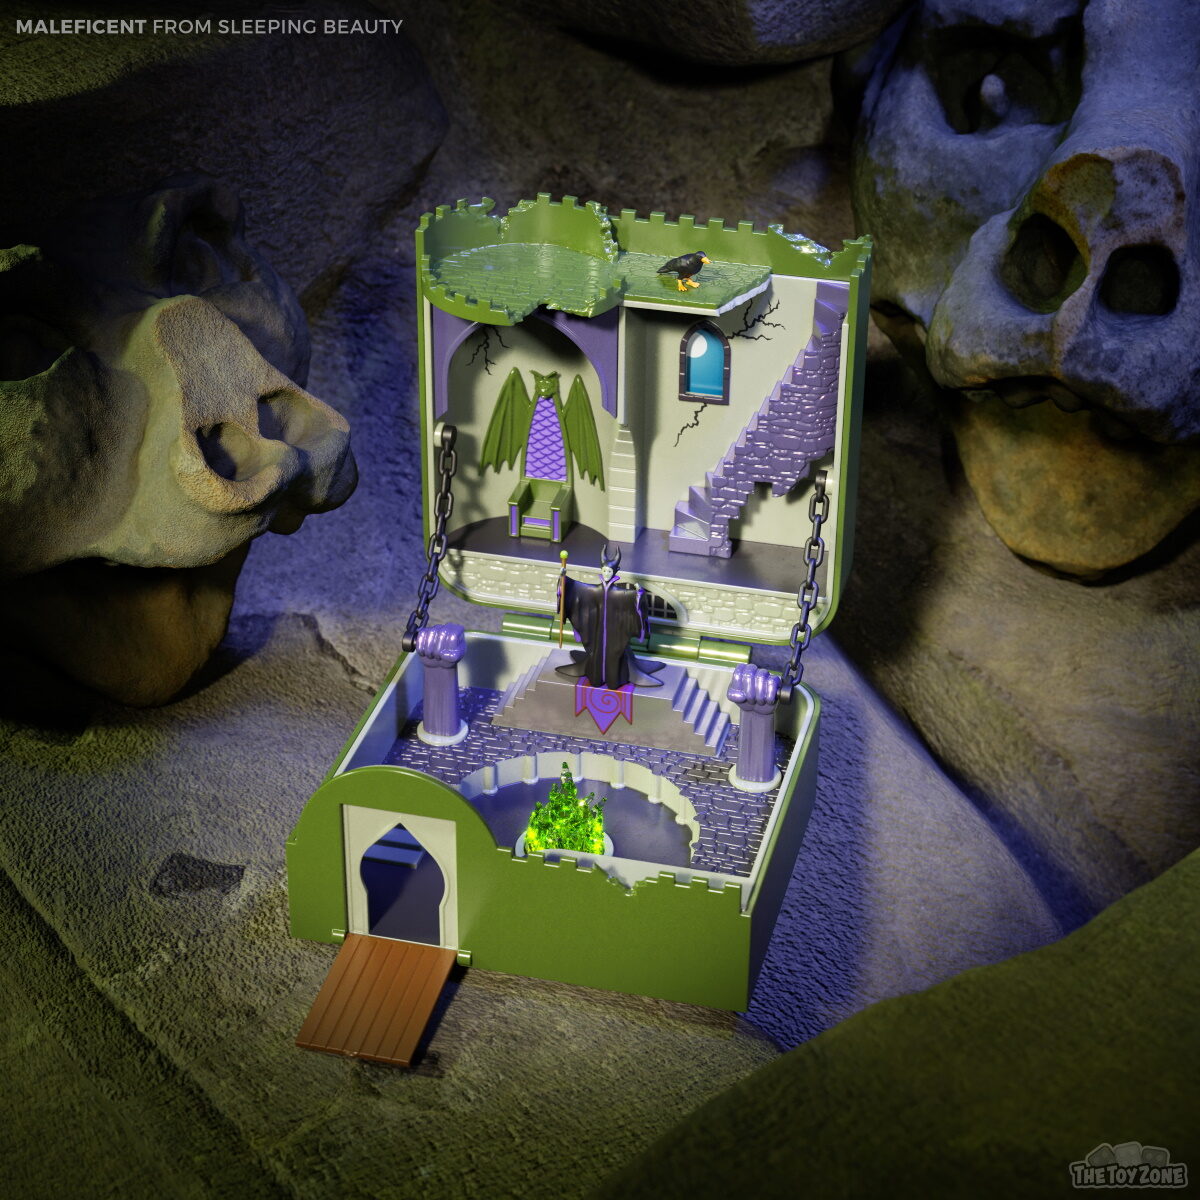 TheToyZone recreates Maleficent's home with Polly Pocket